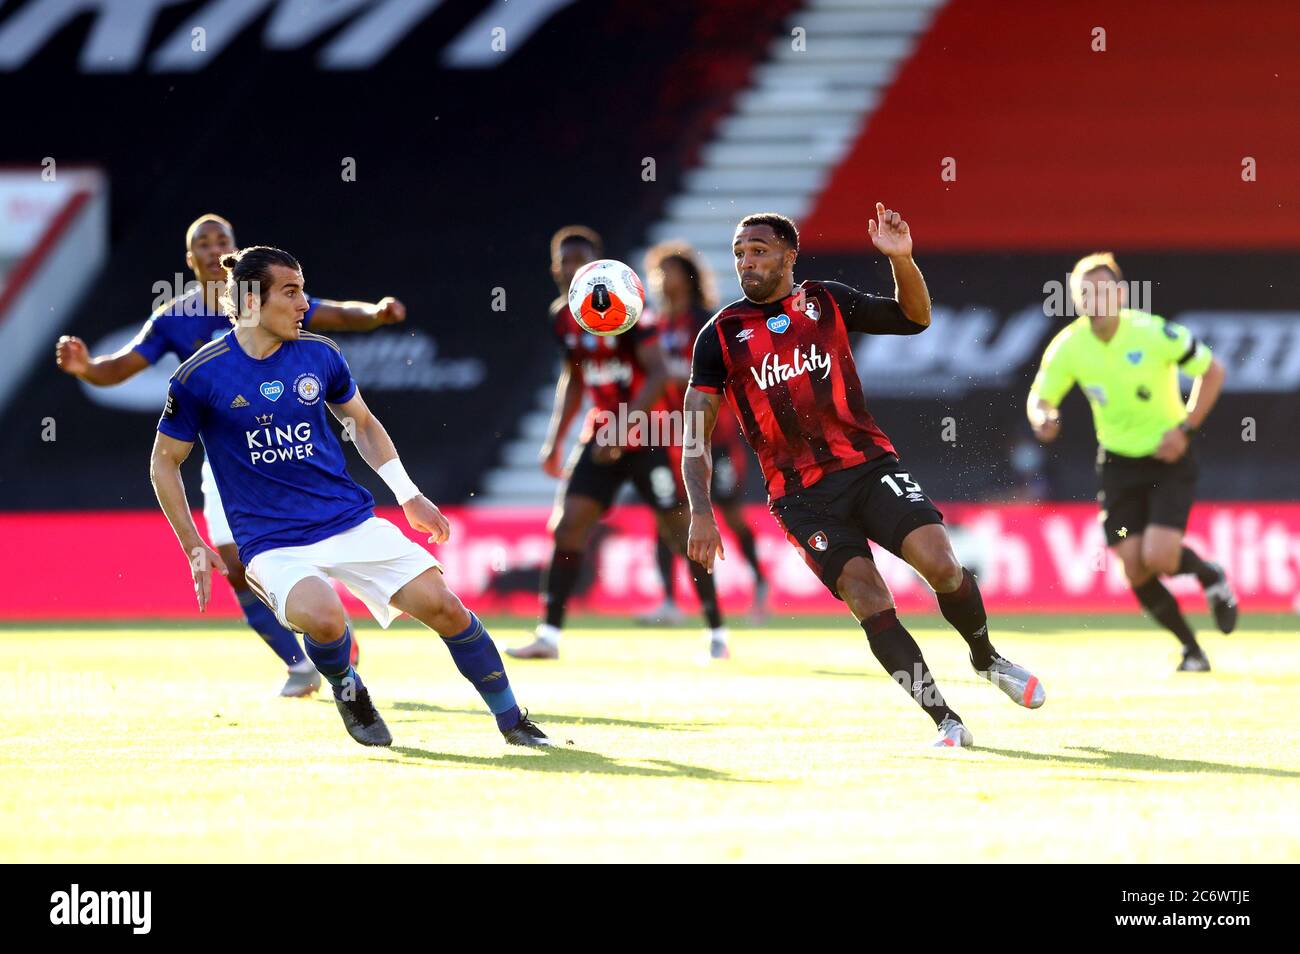 Bournemouth's Callum Wilson (left) and Leicester City's Caglar Soyuncu battle for the ball during the Premier League match at The Vitality Stadium, Bournemouth. Stock Photo